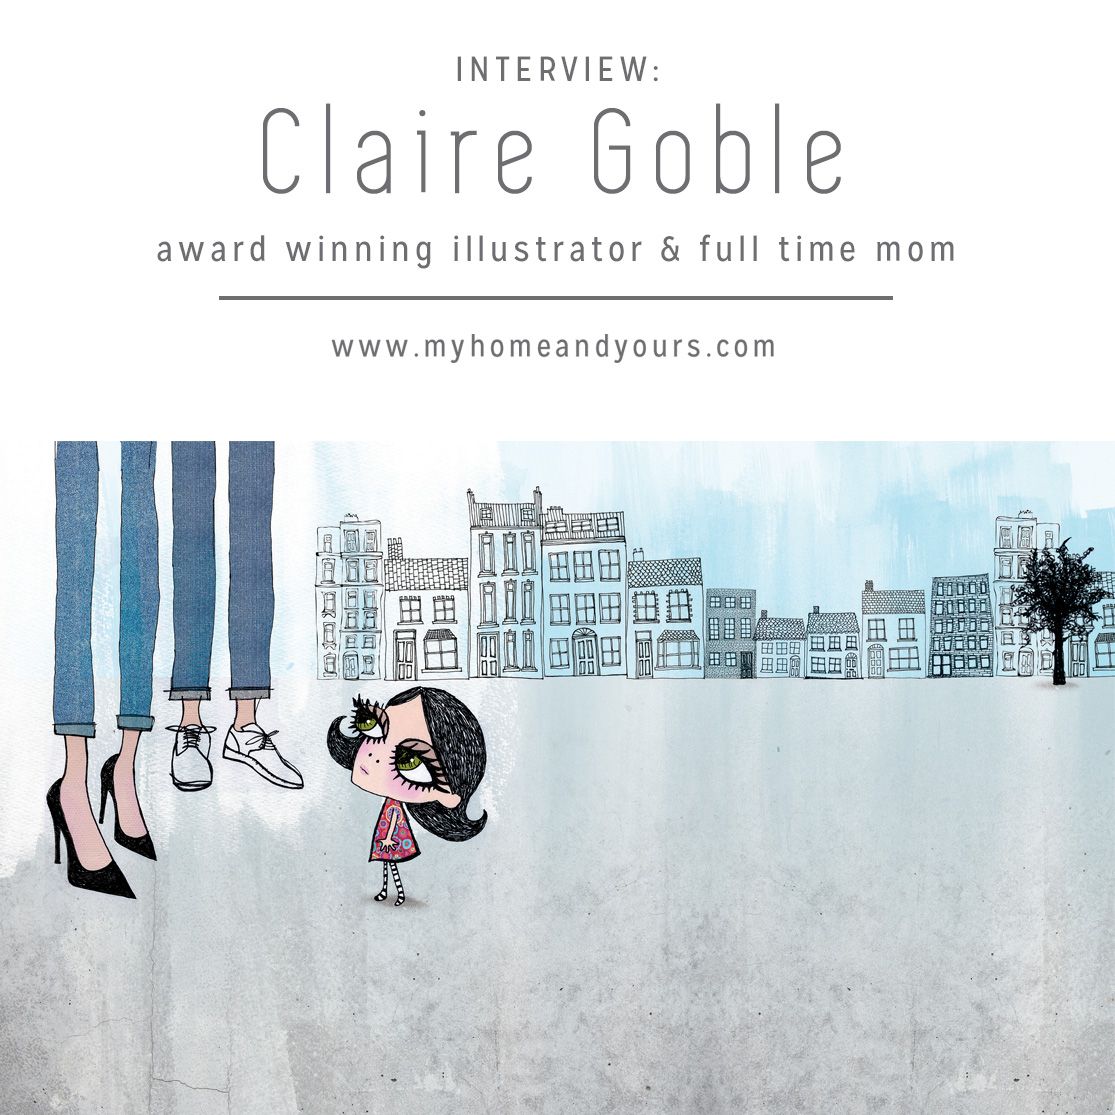 Claire-Goble-awardwinning-illustrator-and-full-time-mom-interview-by-My-Home-and-Yours-blog_s